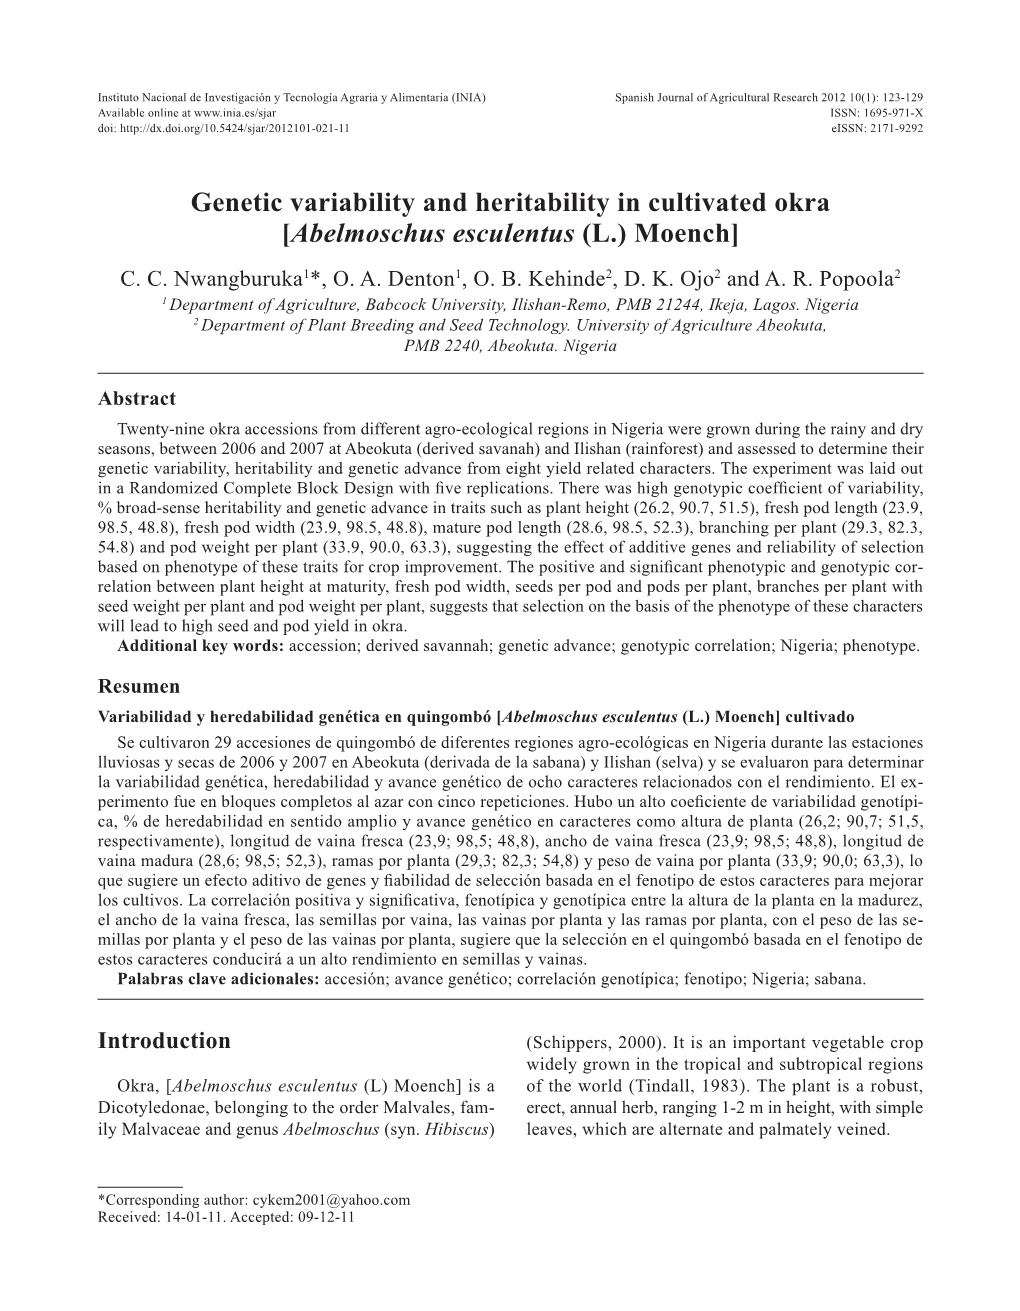 Genetic Variability and Heritability in Cultivated Okra [Abelmoschus Esculentus (L.) Moench] C